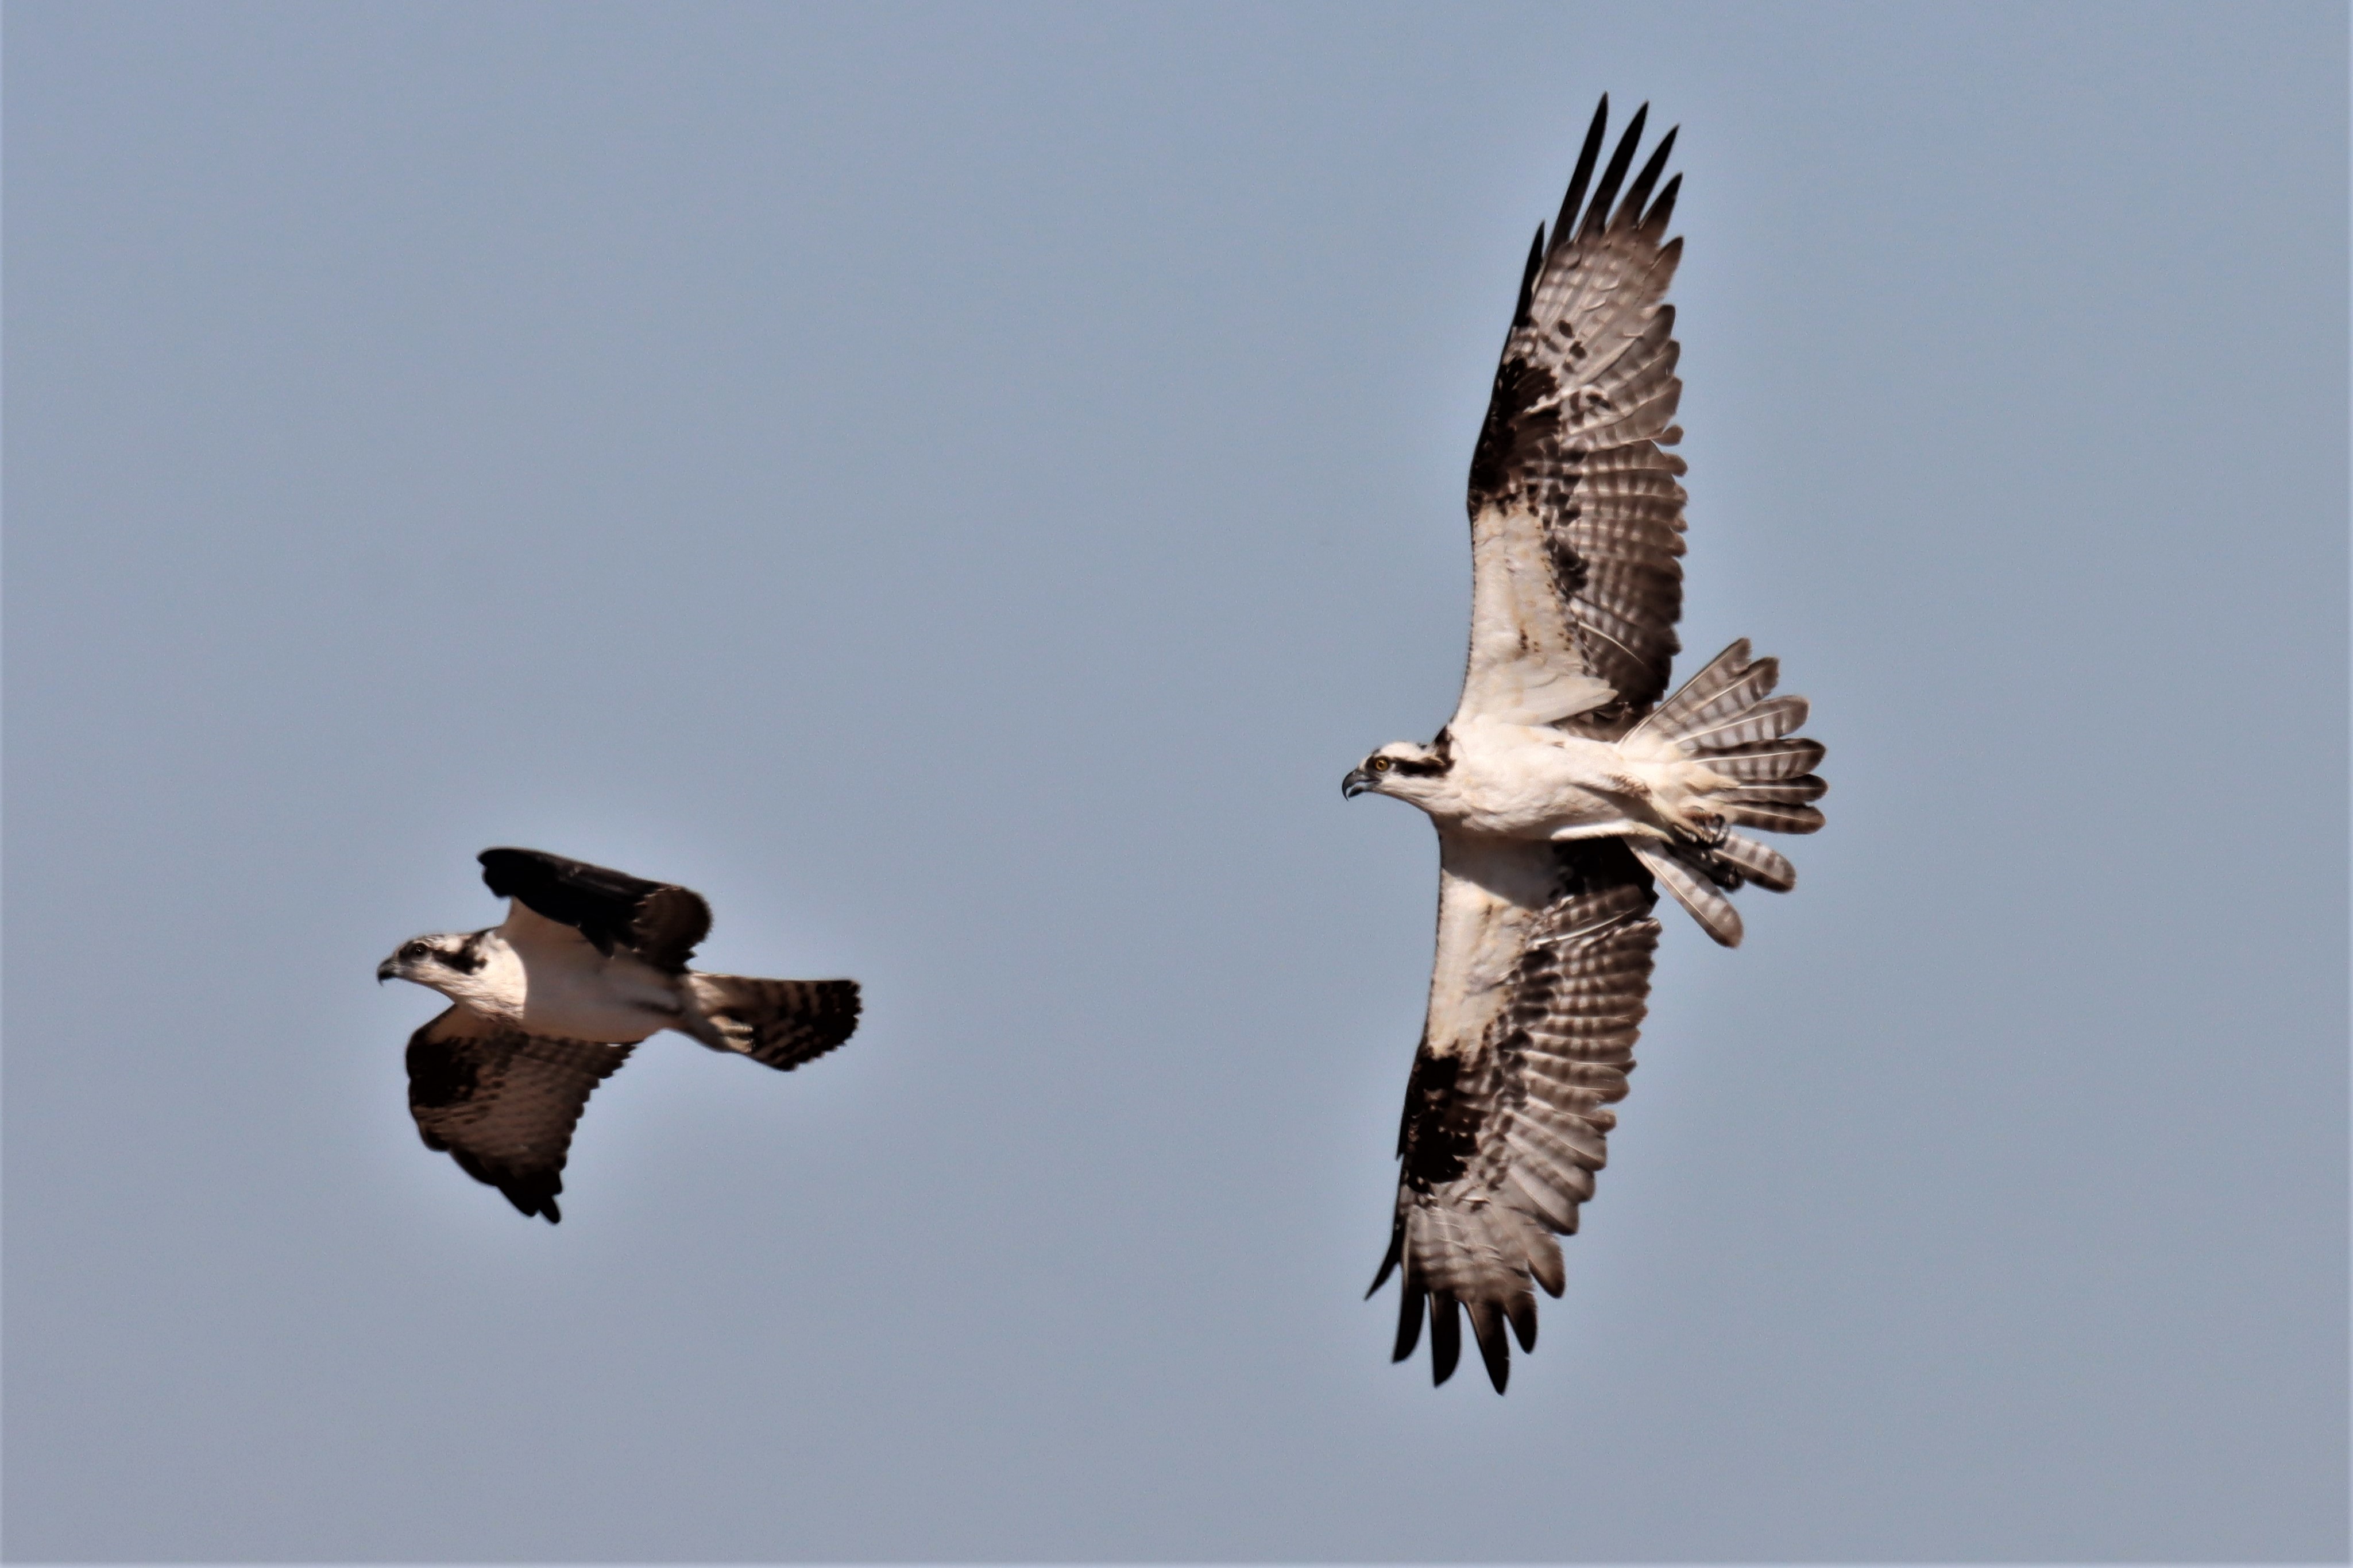 Photo by Buddy Walker  |   "Osprey's In Flight": competing for fishing site
